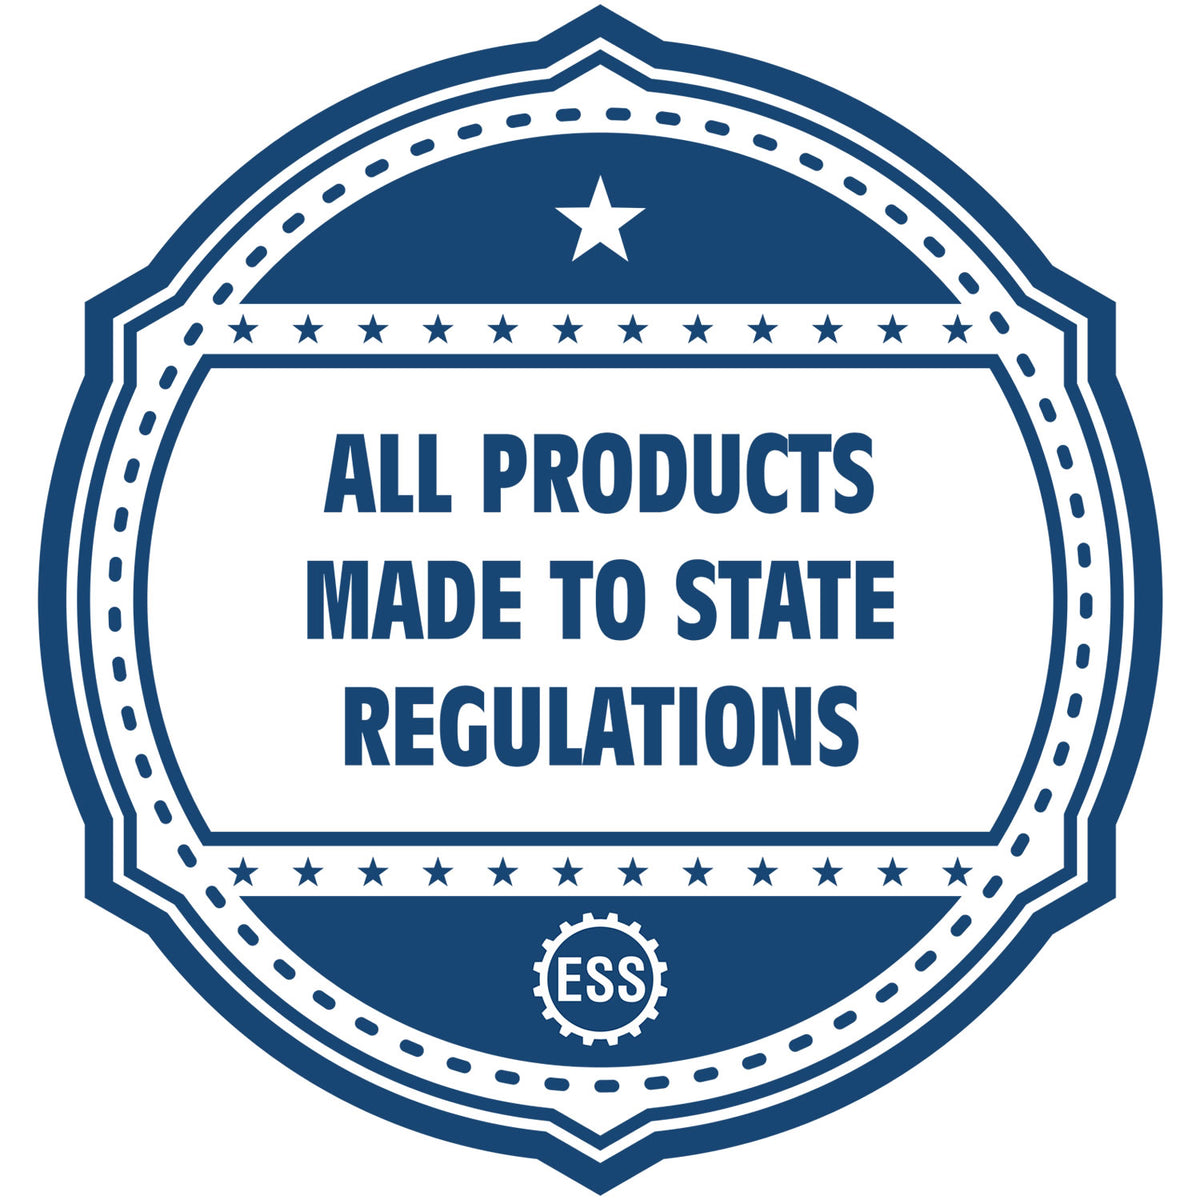 An icon or badge element for the Super Slim Connecticut Notary Public Stamp showing that this product is made in compliance with state regulations.